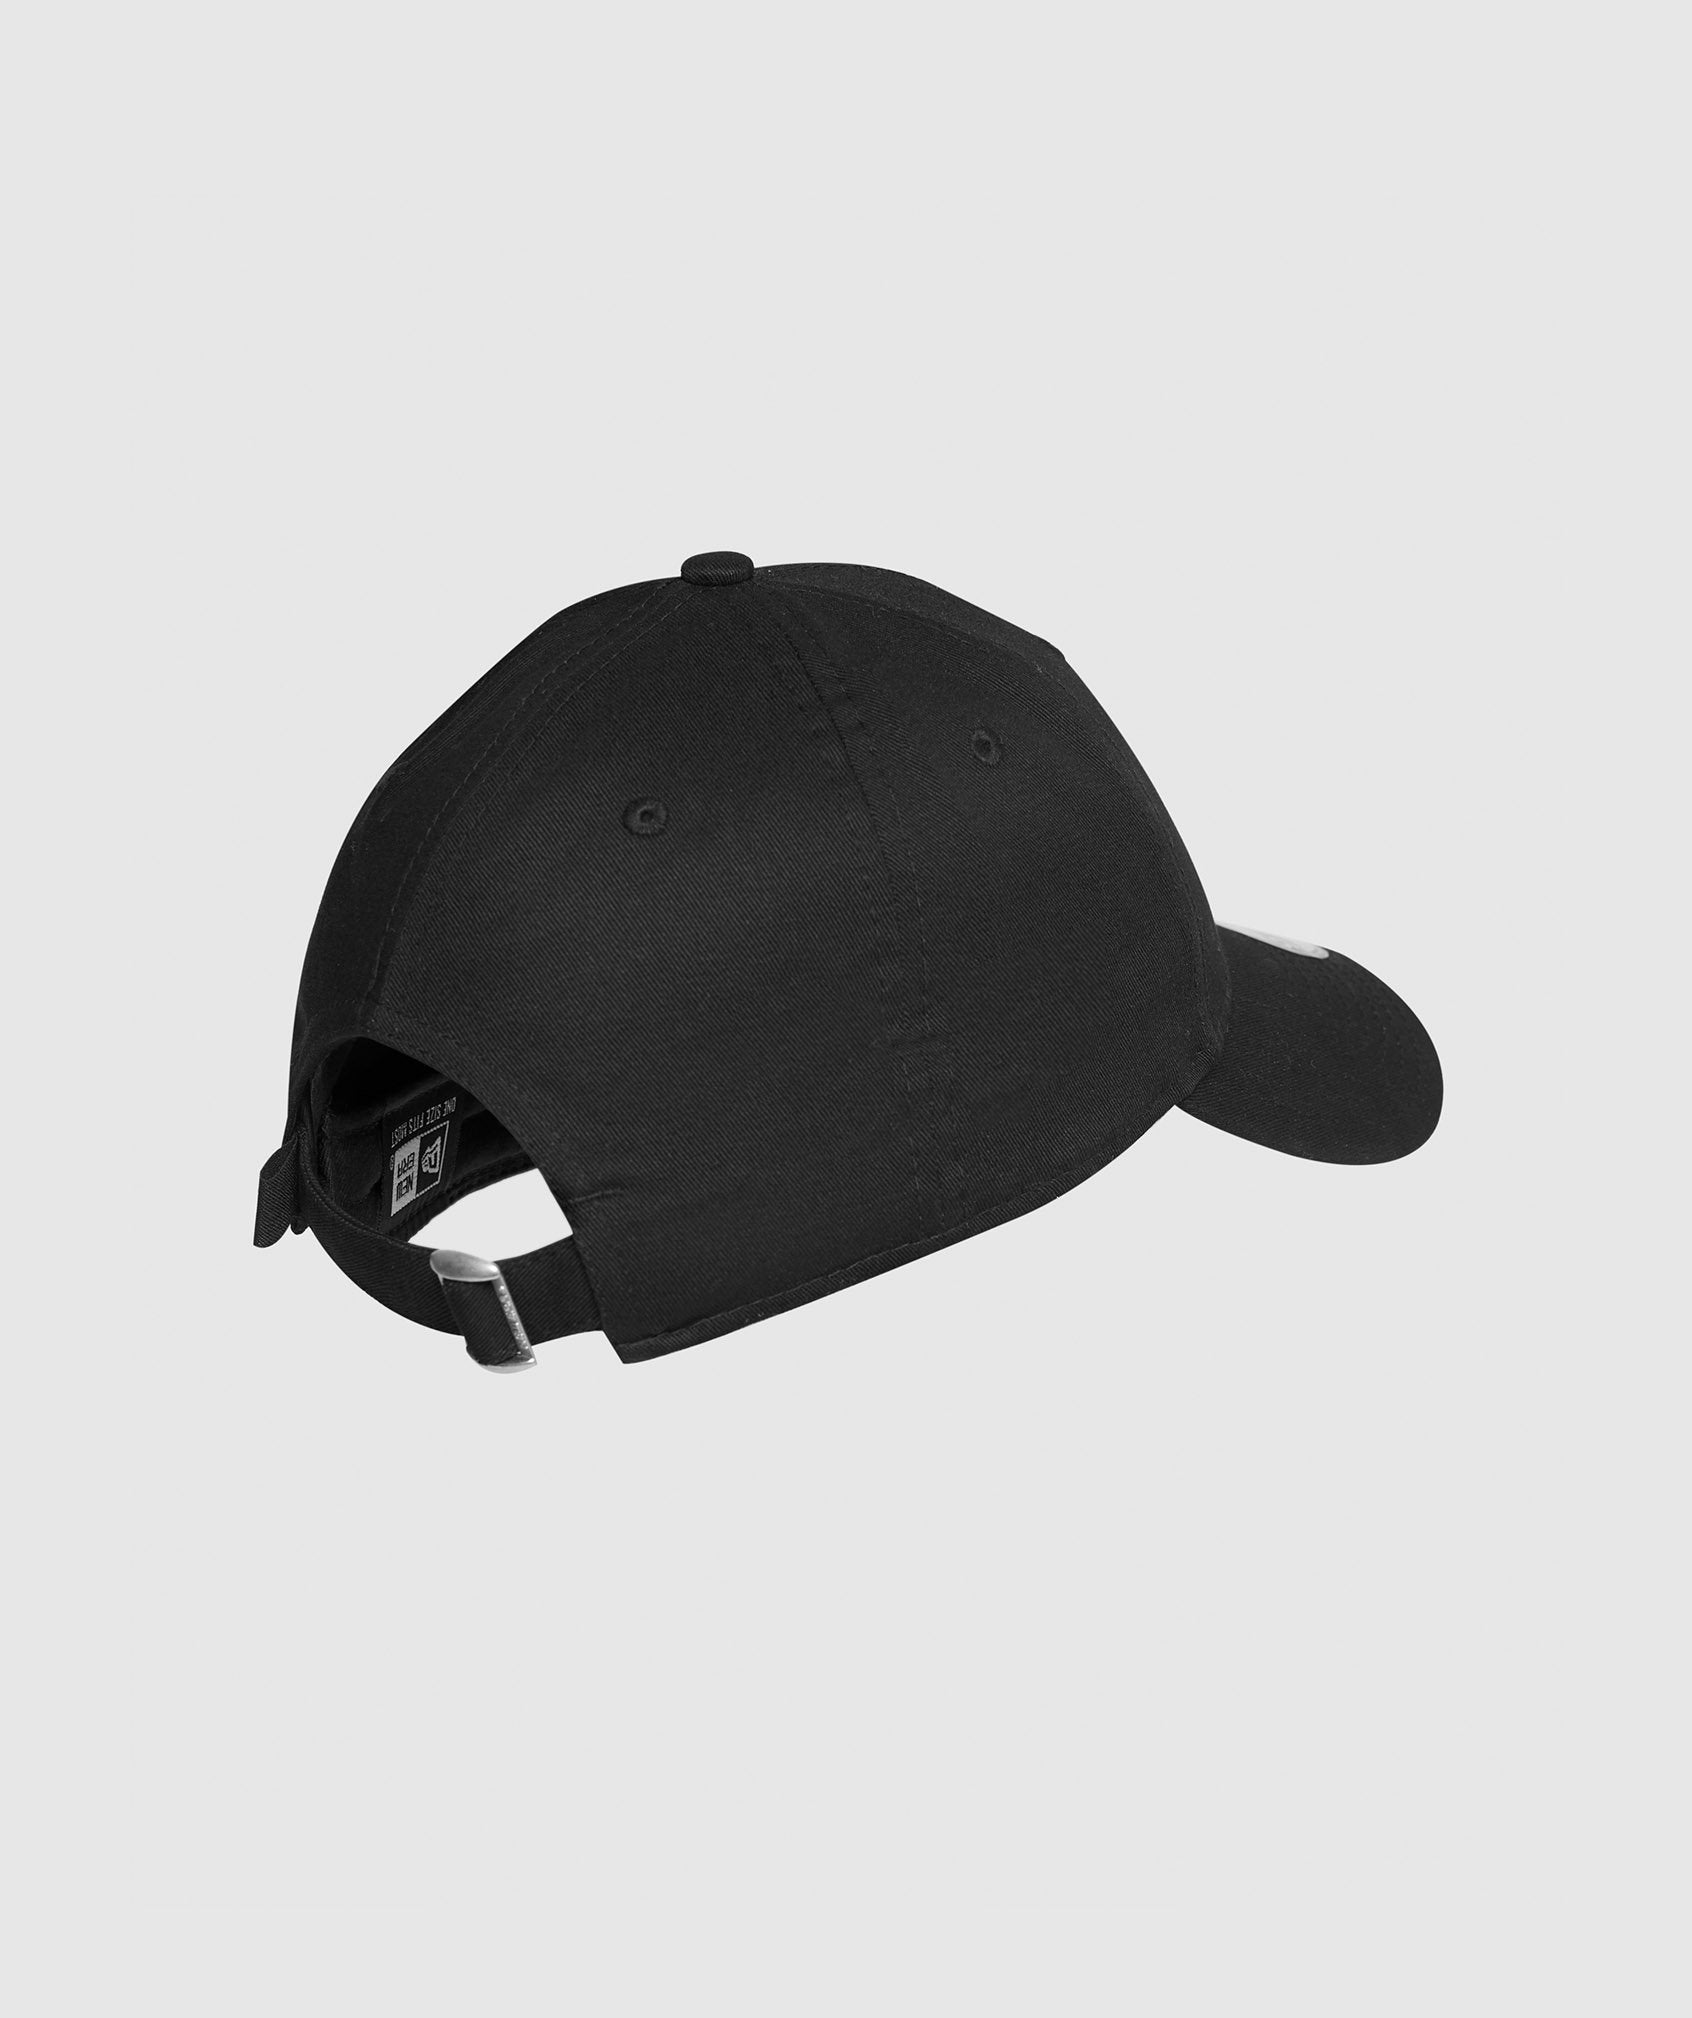 New Era 9FORTY Adjustable in Black/White - view 2